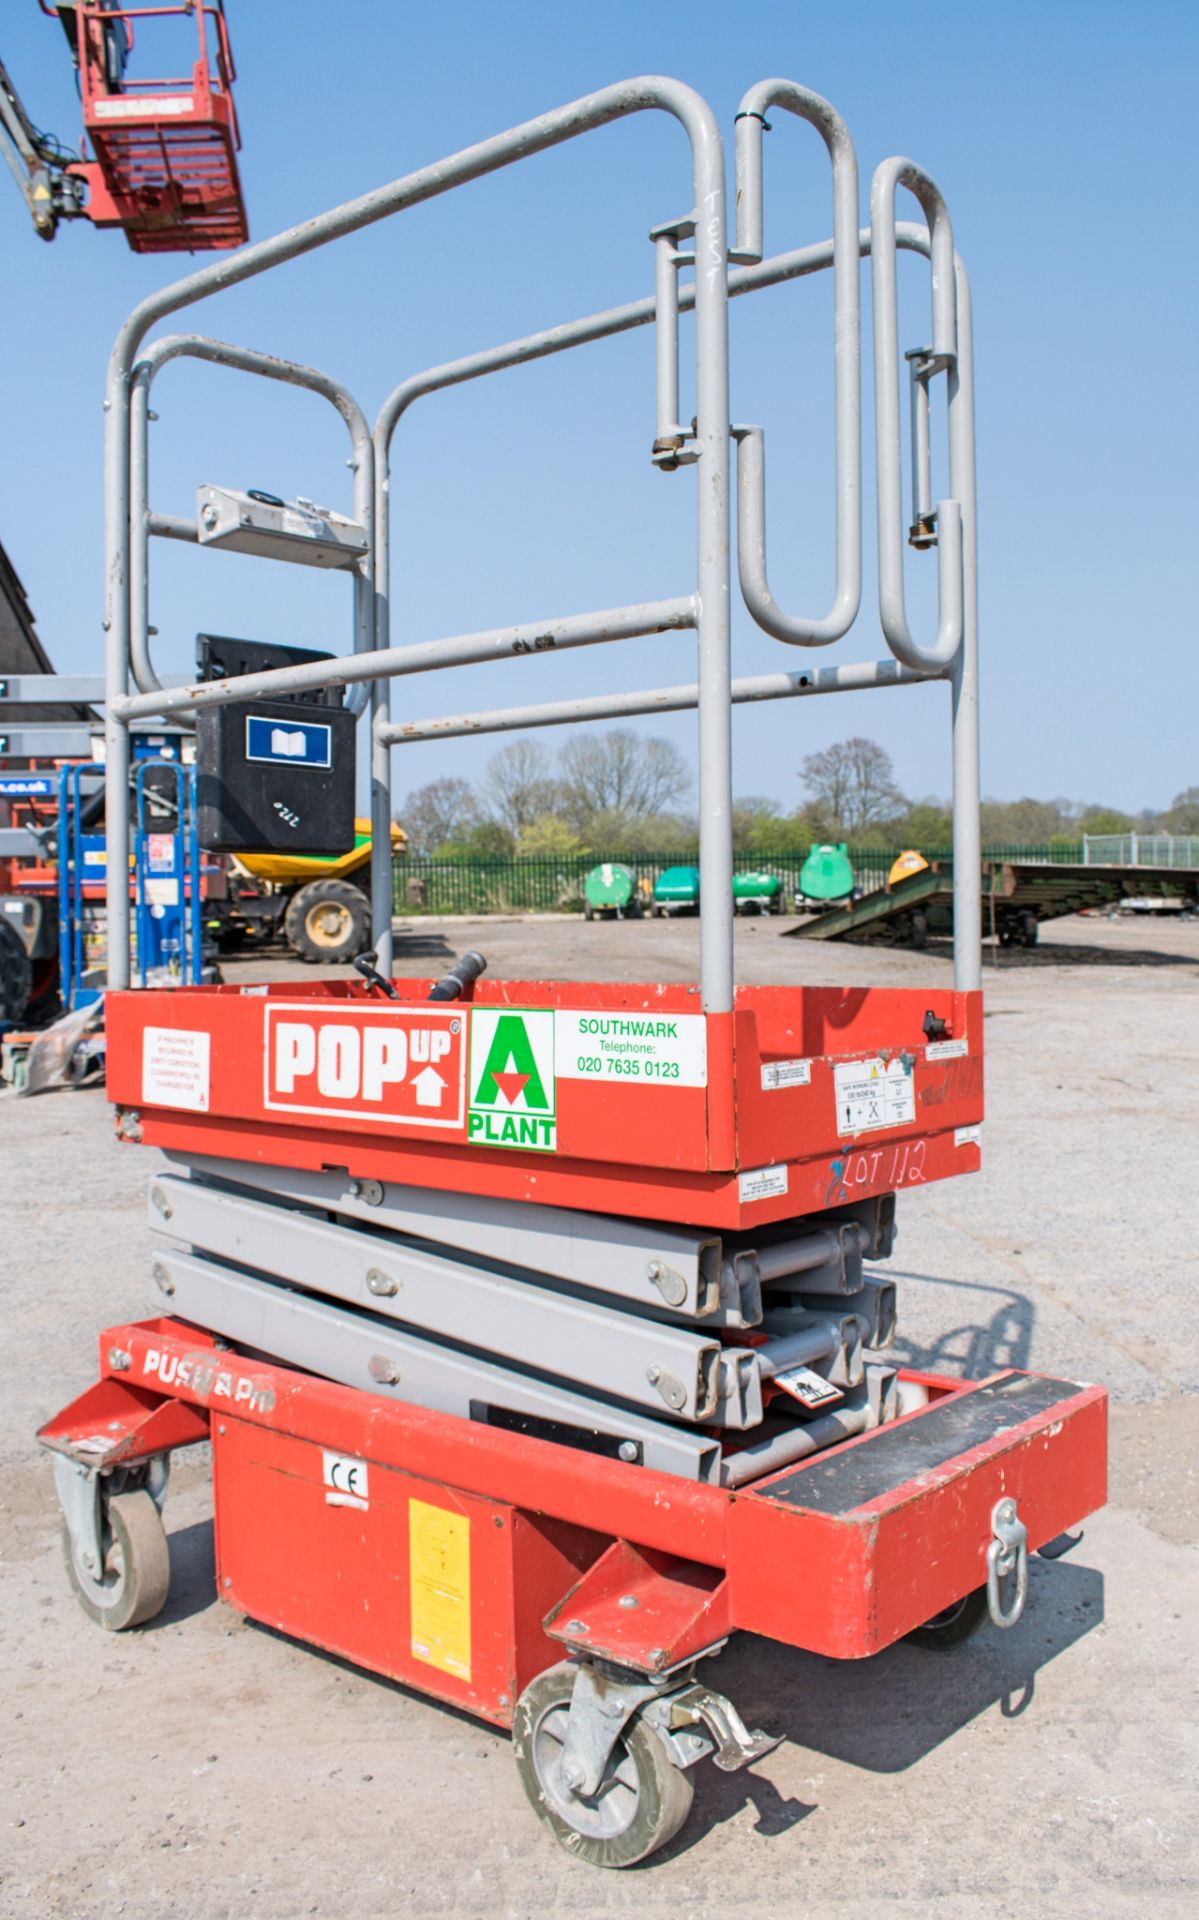 Push 8 Pro battery electric scissor lift Year: 2013 A60889 - Image 2 of 4